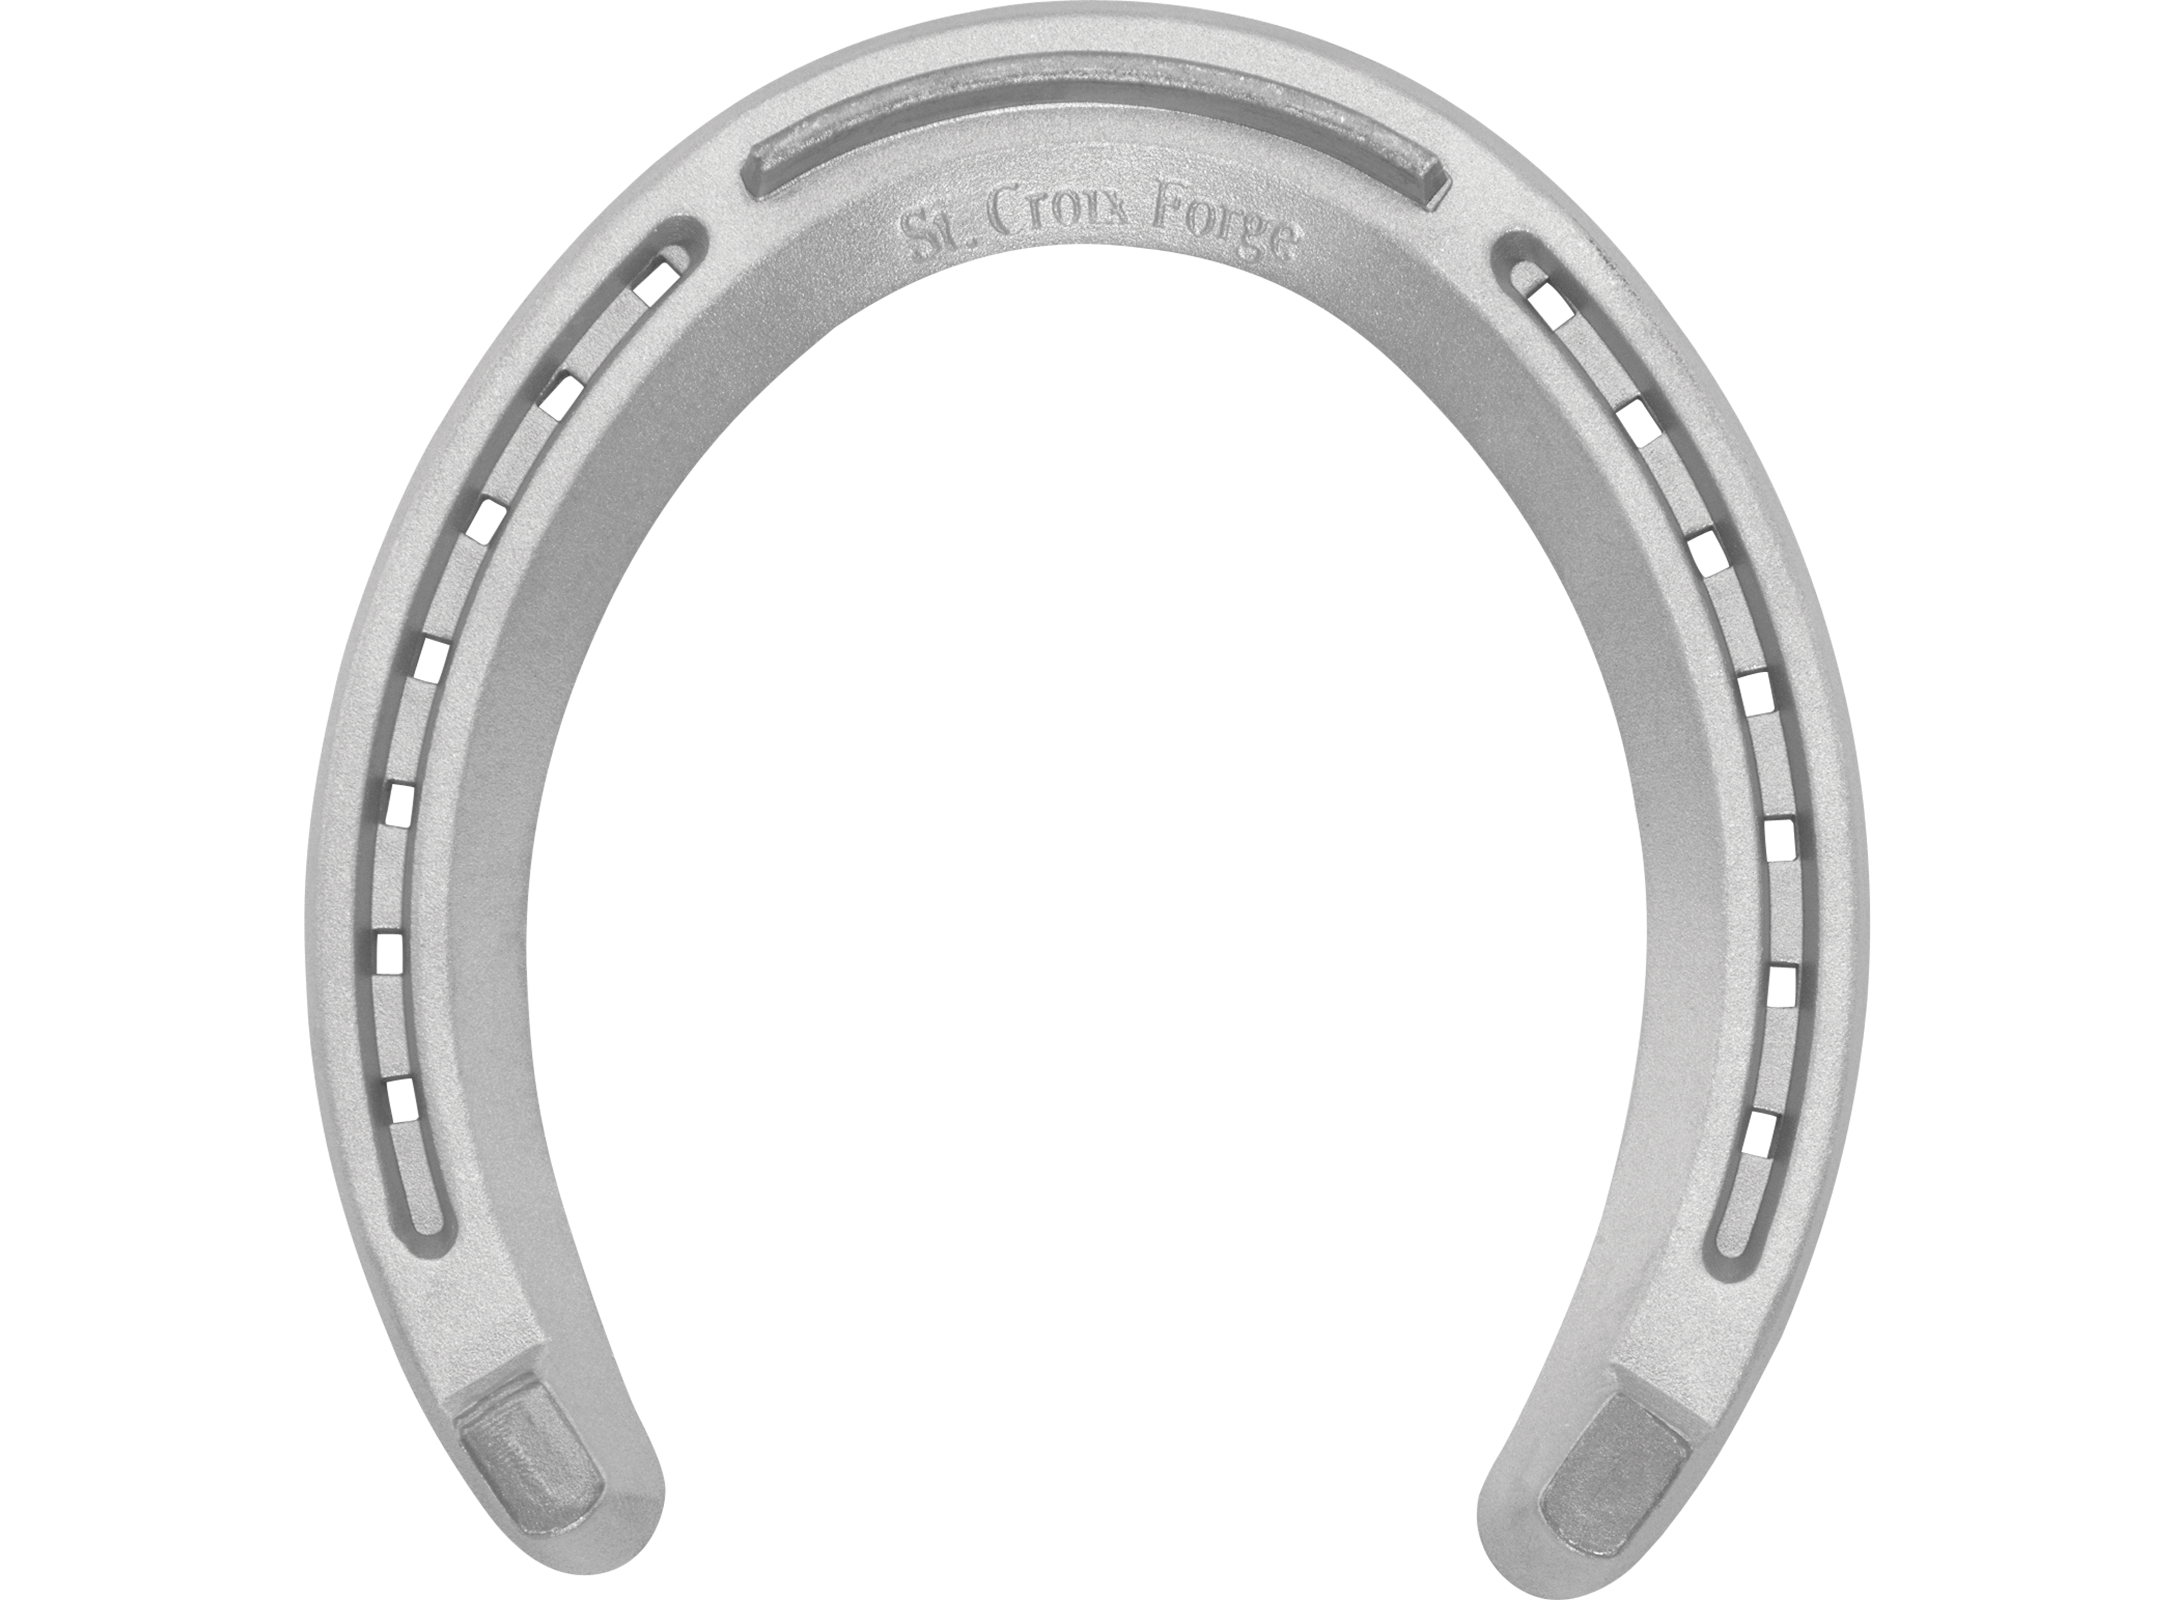 St. Croix Quarter Horse Block Heel horseshoes, front and hind, bottom